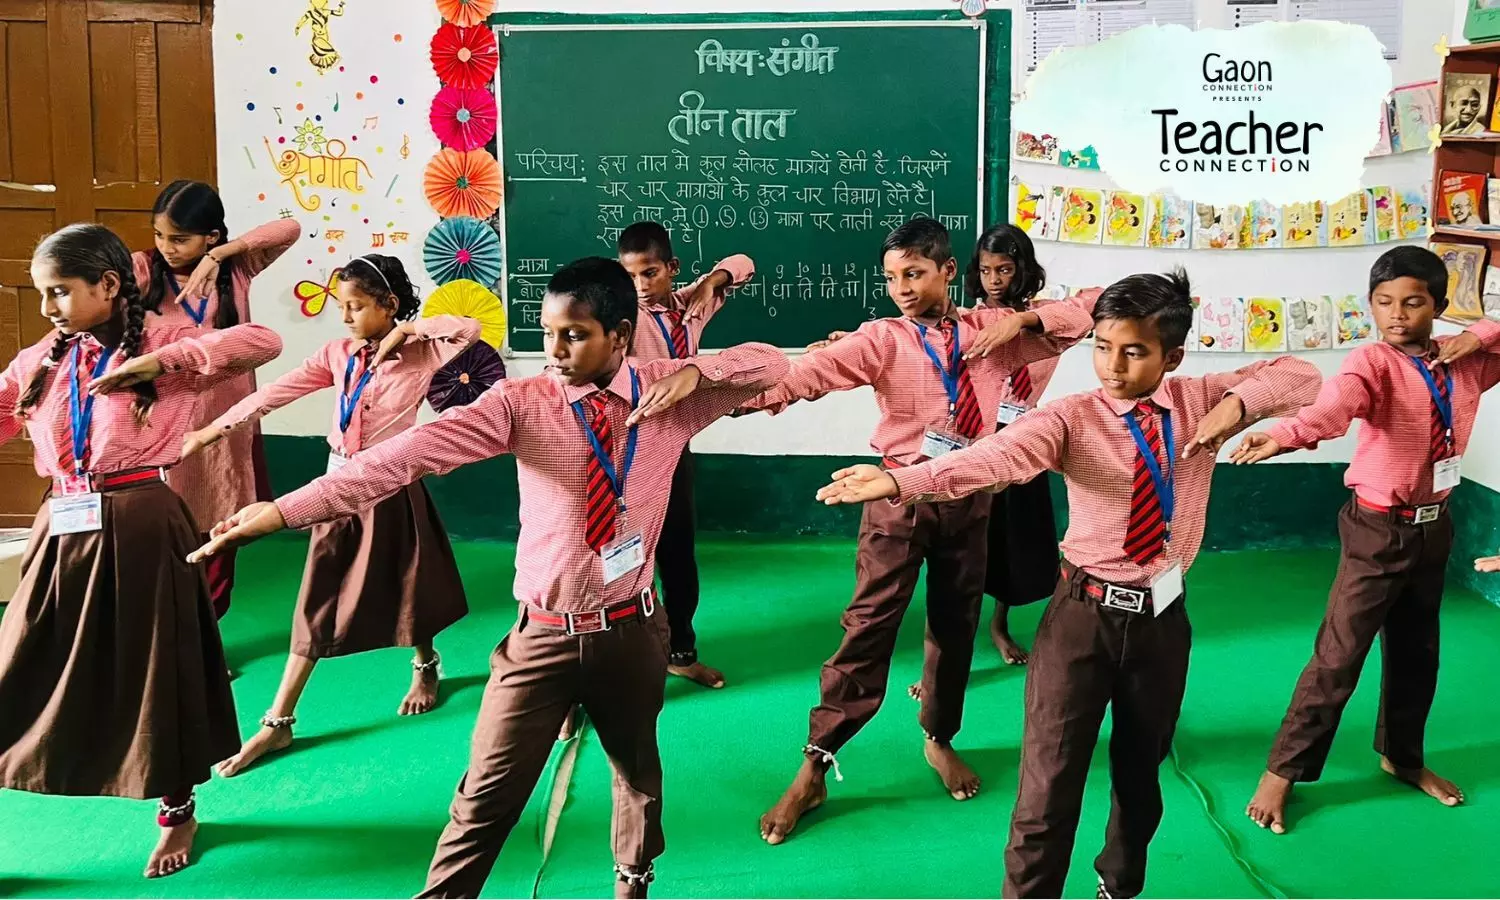 It is K for ‘Kathak’ at this government primary school in Raebareli, UP